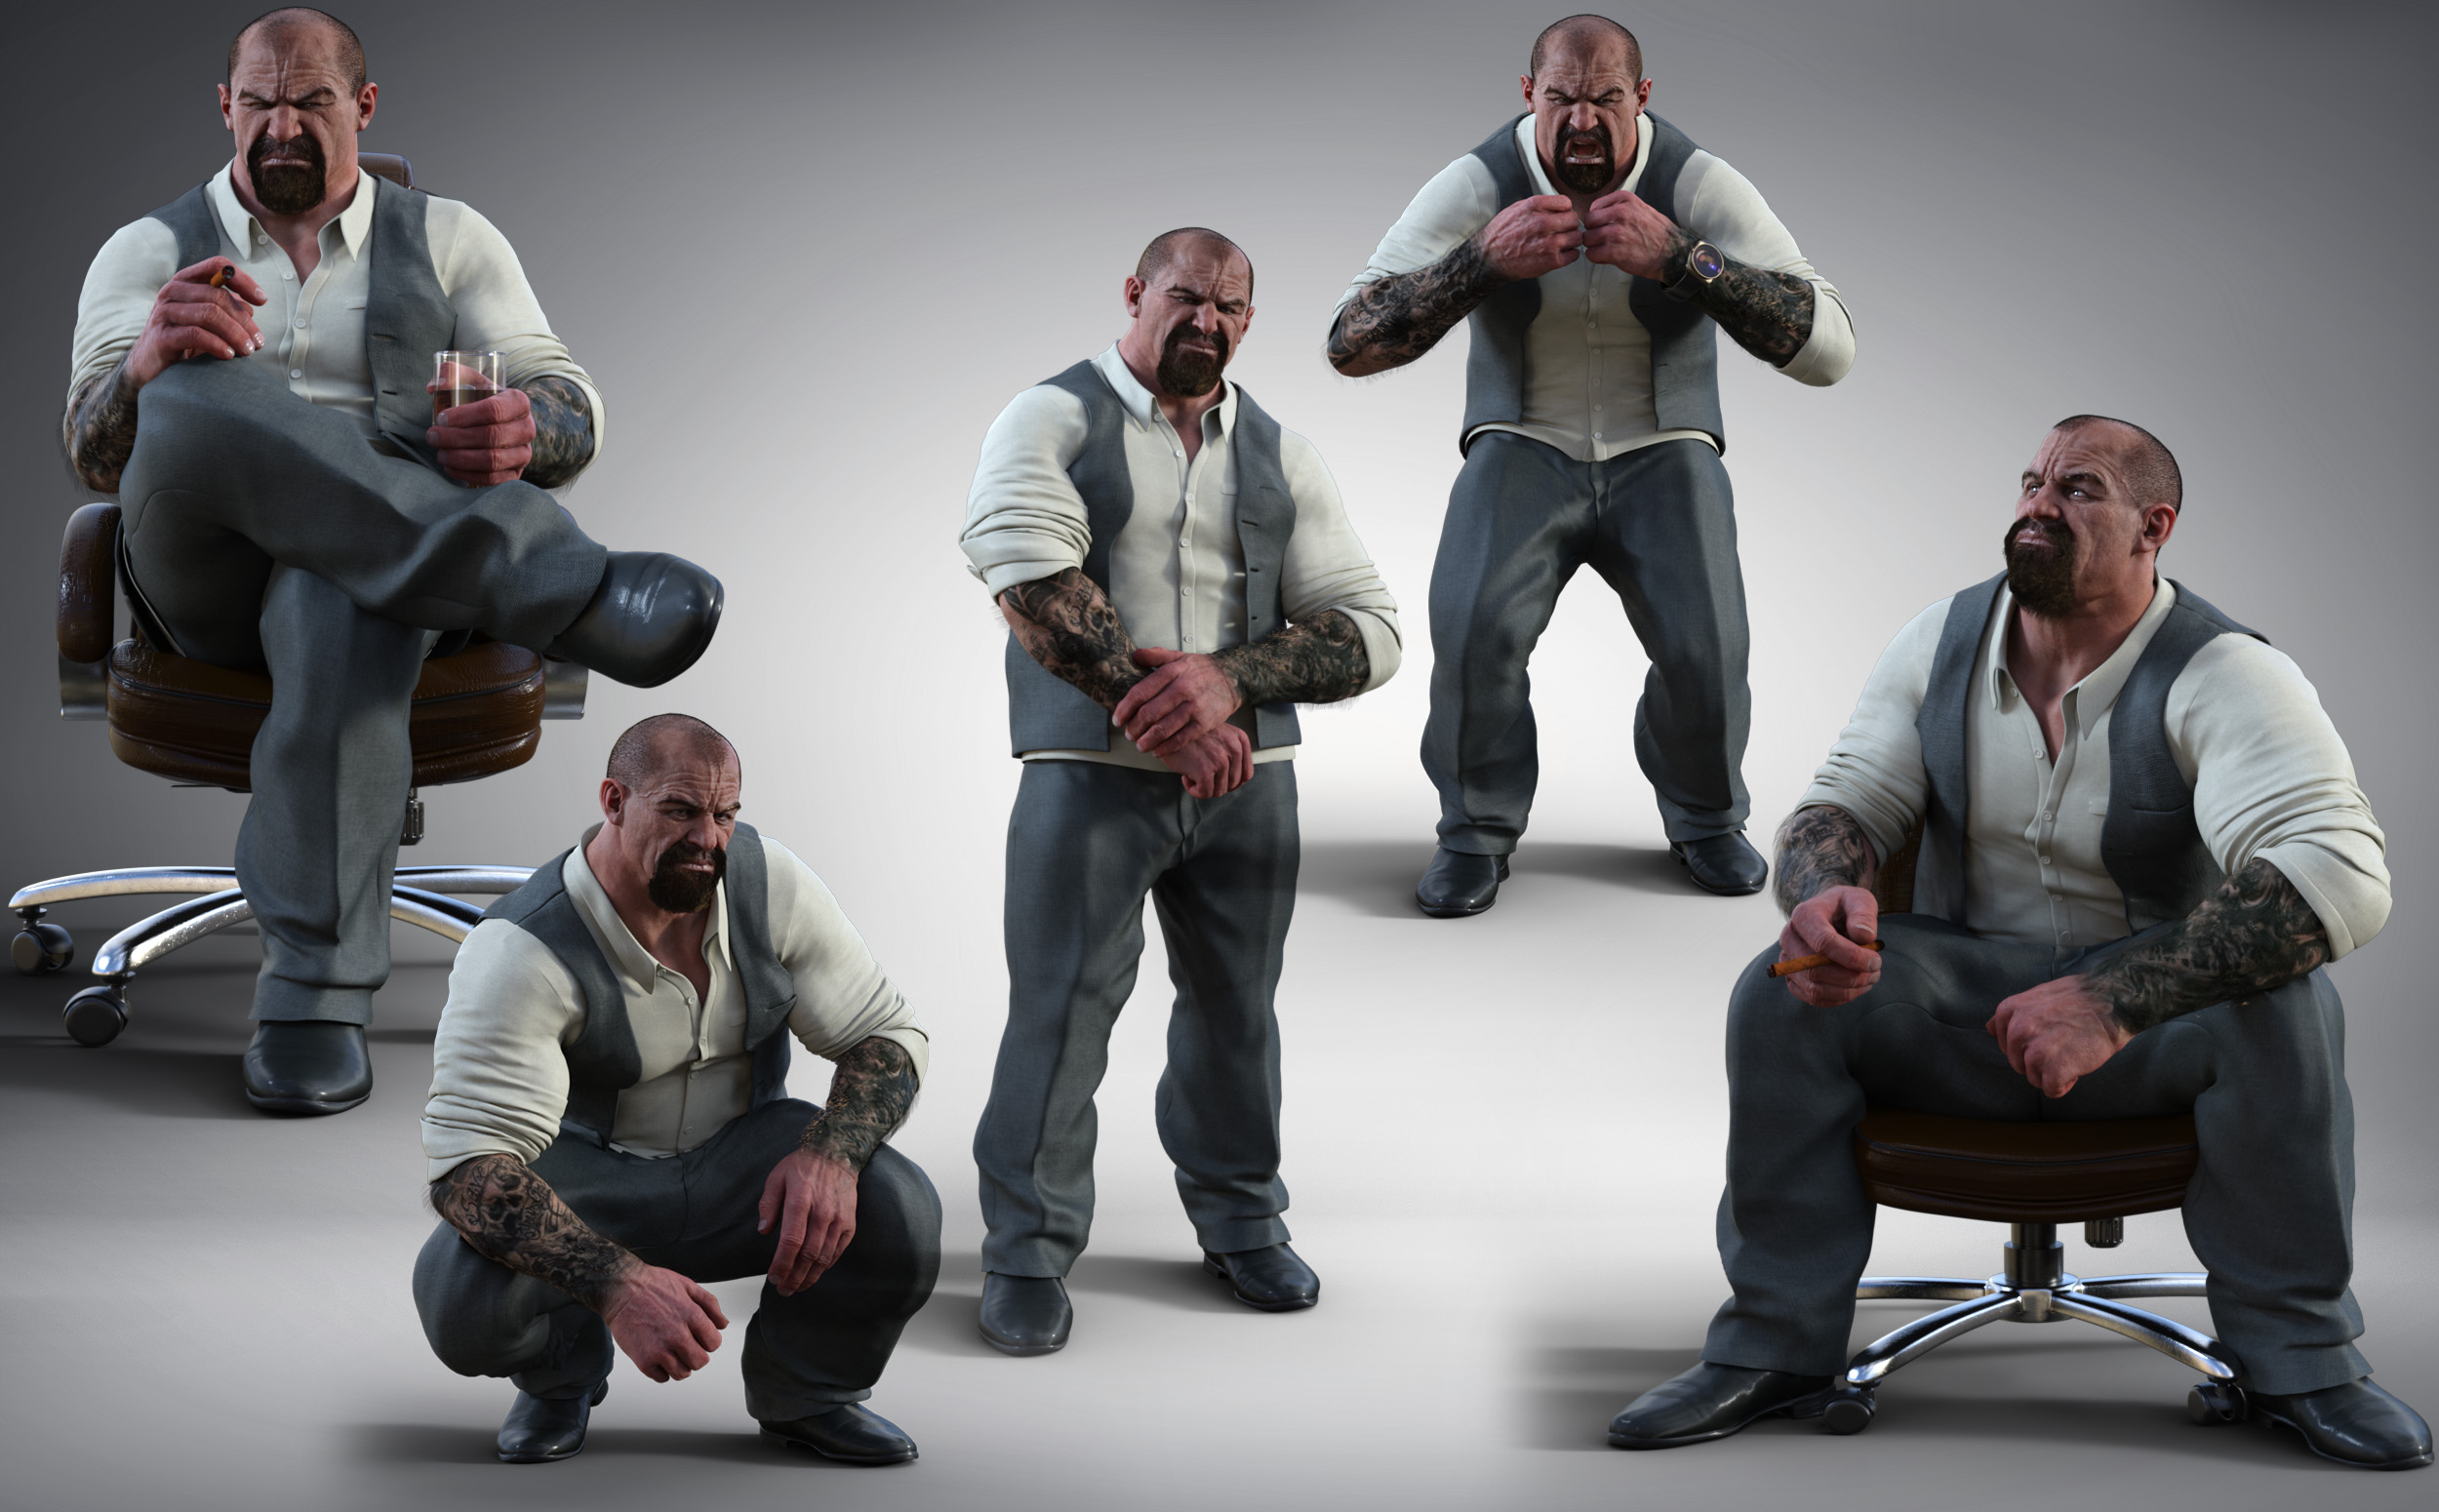 Z Man of Power Poses and Expressions for Underbelly by: Zeddicuss, 3D Models by Daz 3D